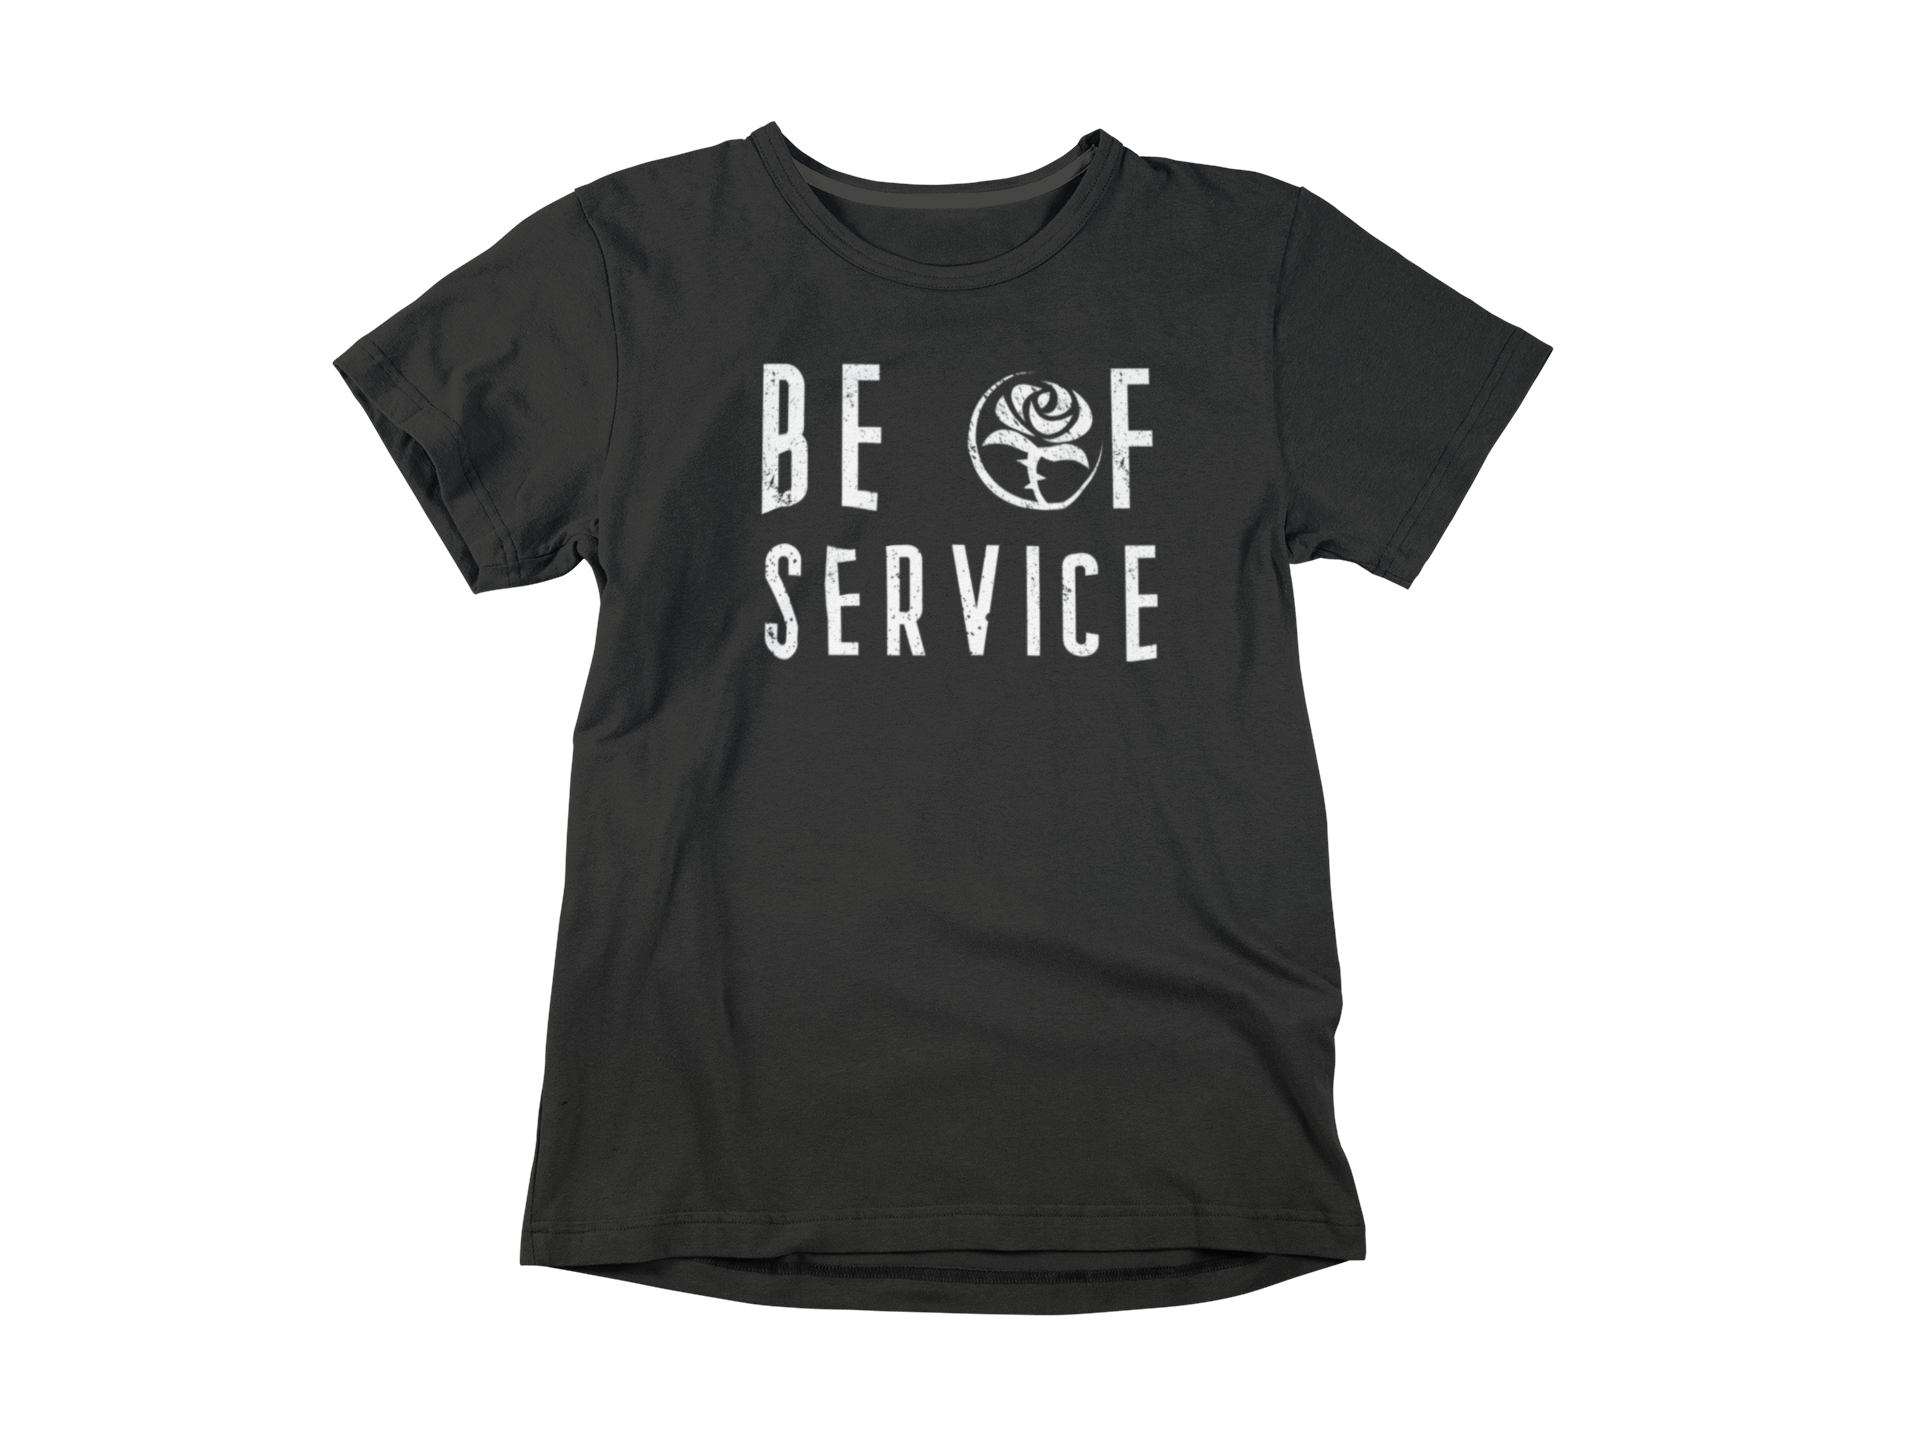 'Be Of Service' Short-Sleeve T-Shirt